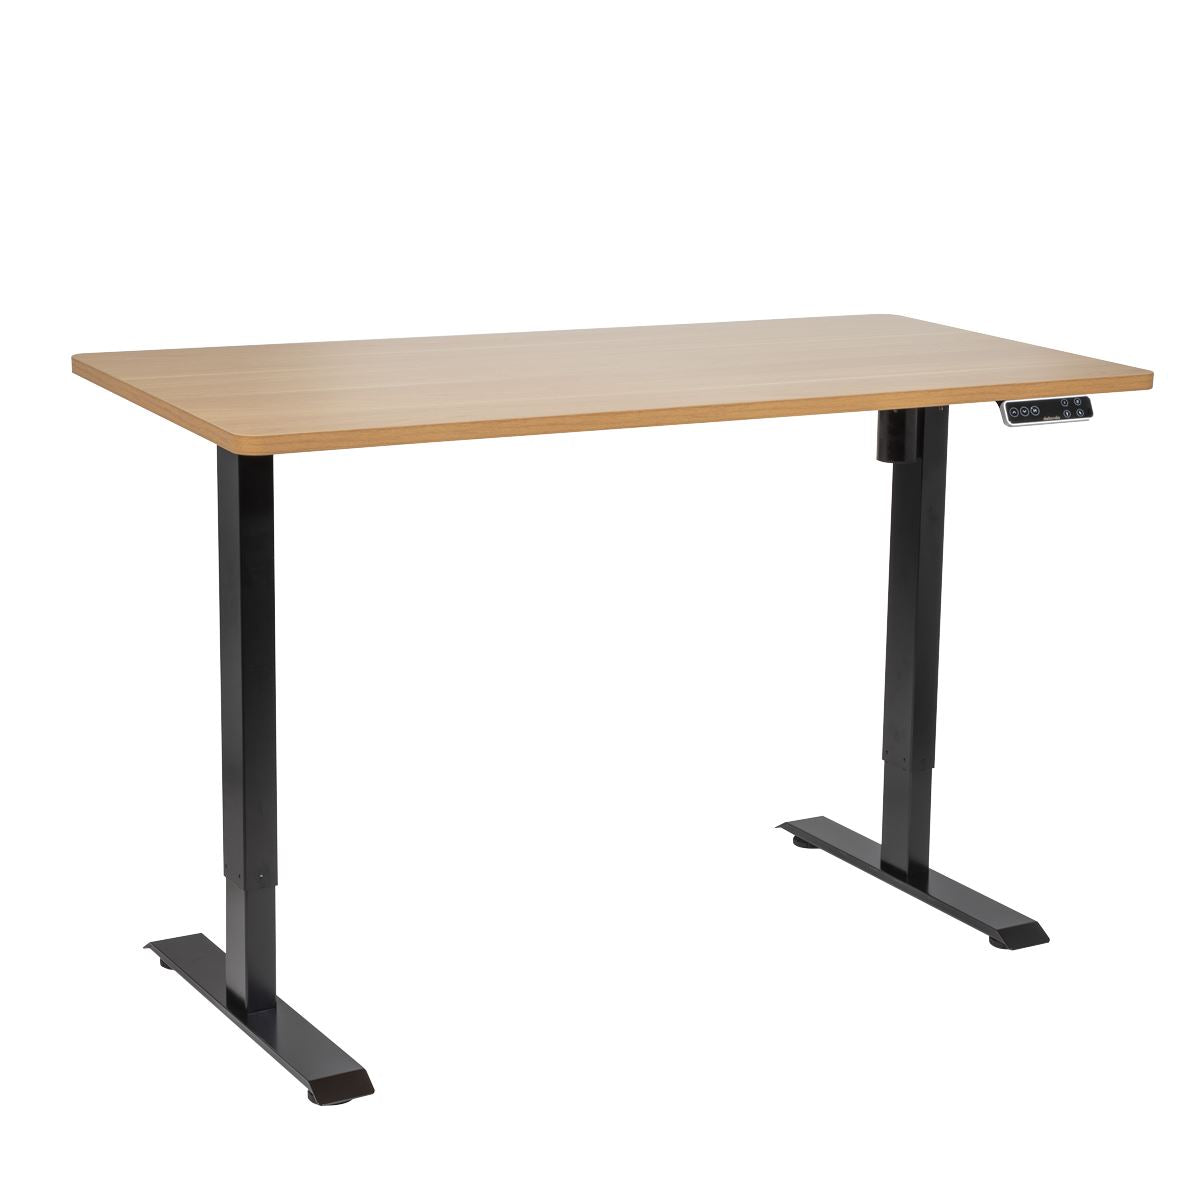 Dellonda Oak Electric Height Adjustable Standing Desk with Memory, Quiet & Fast 1400 x 700mm